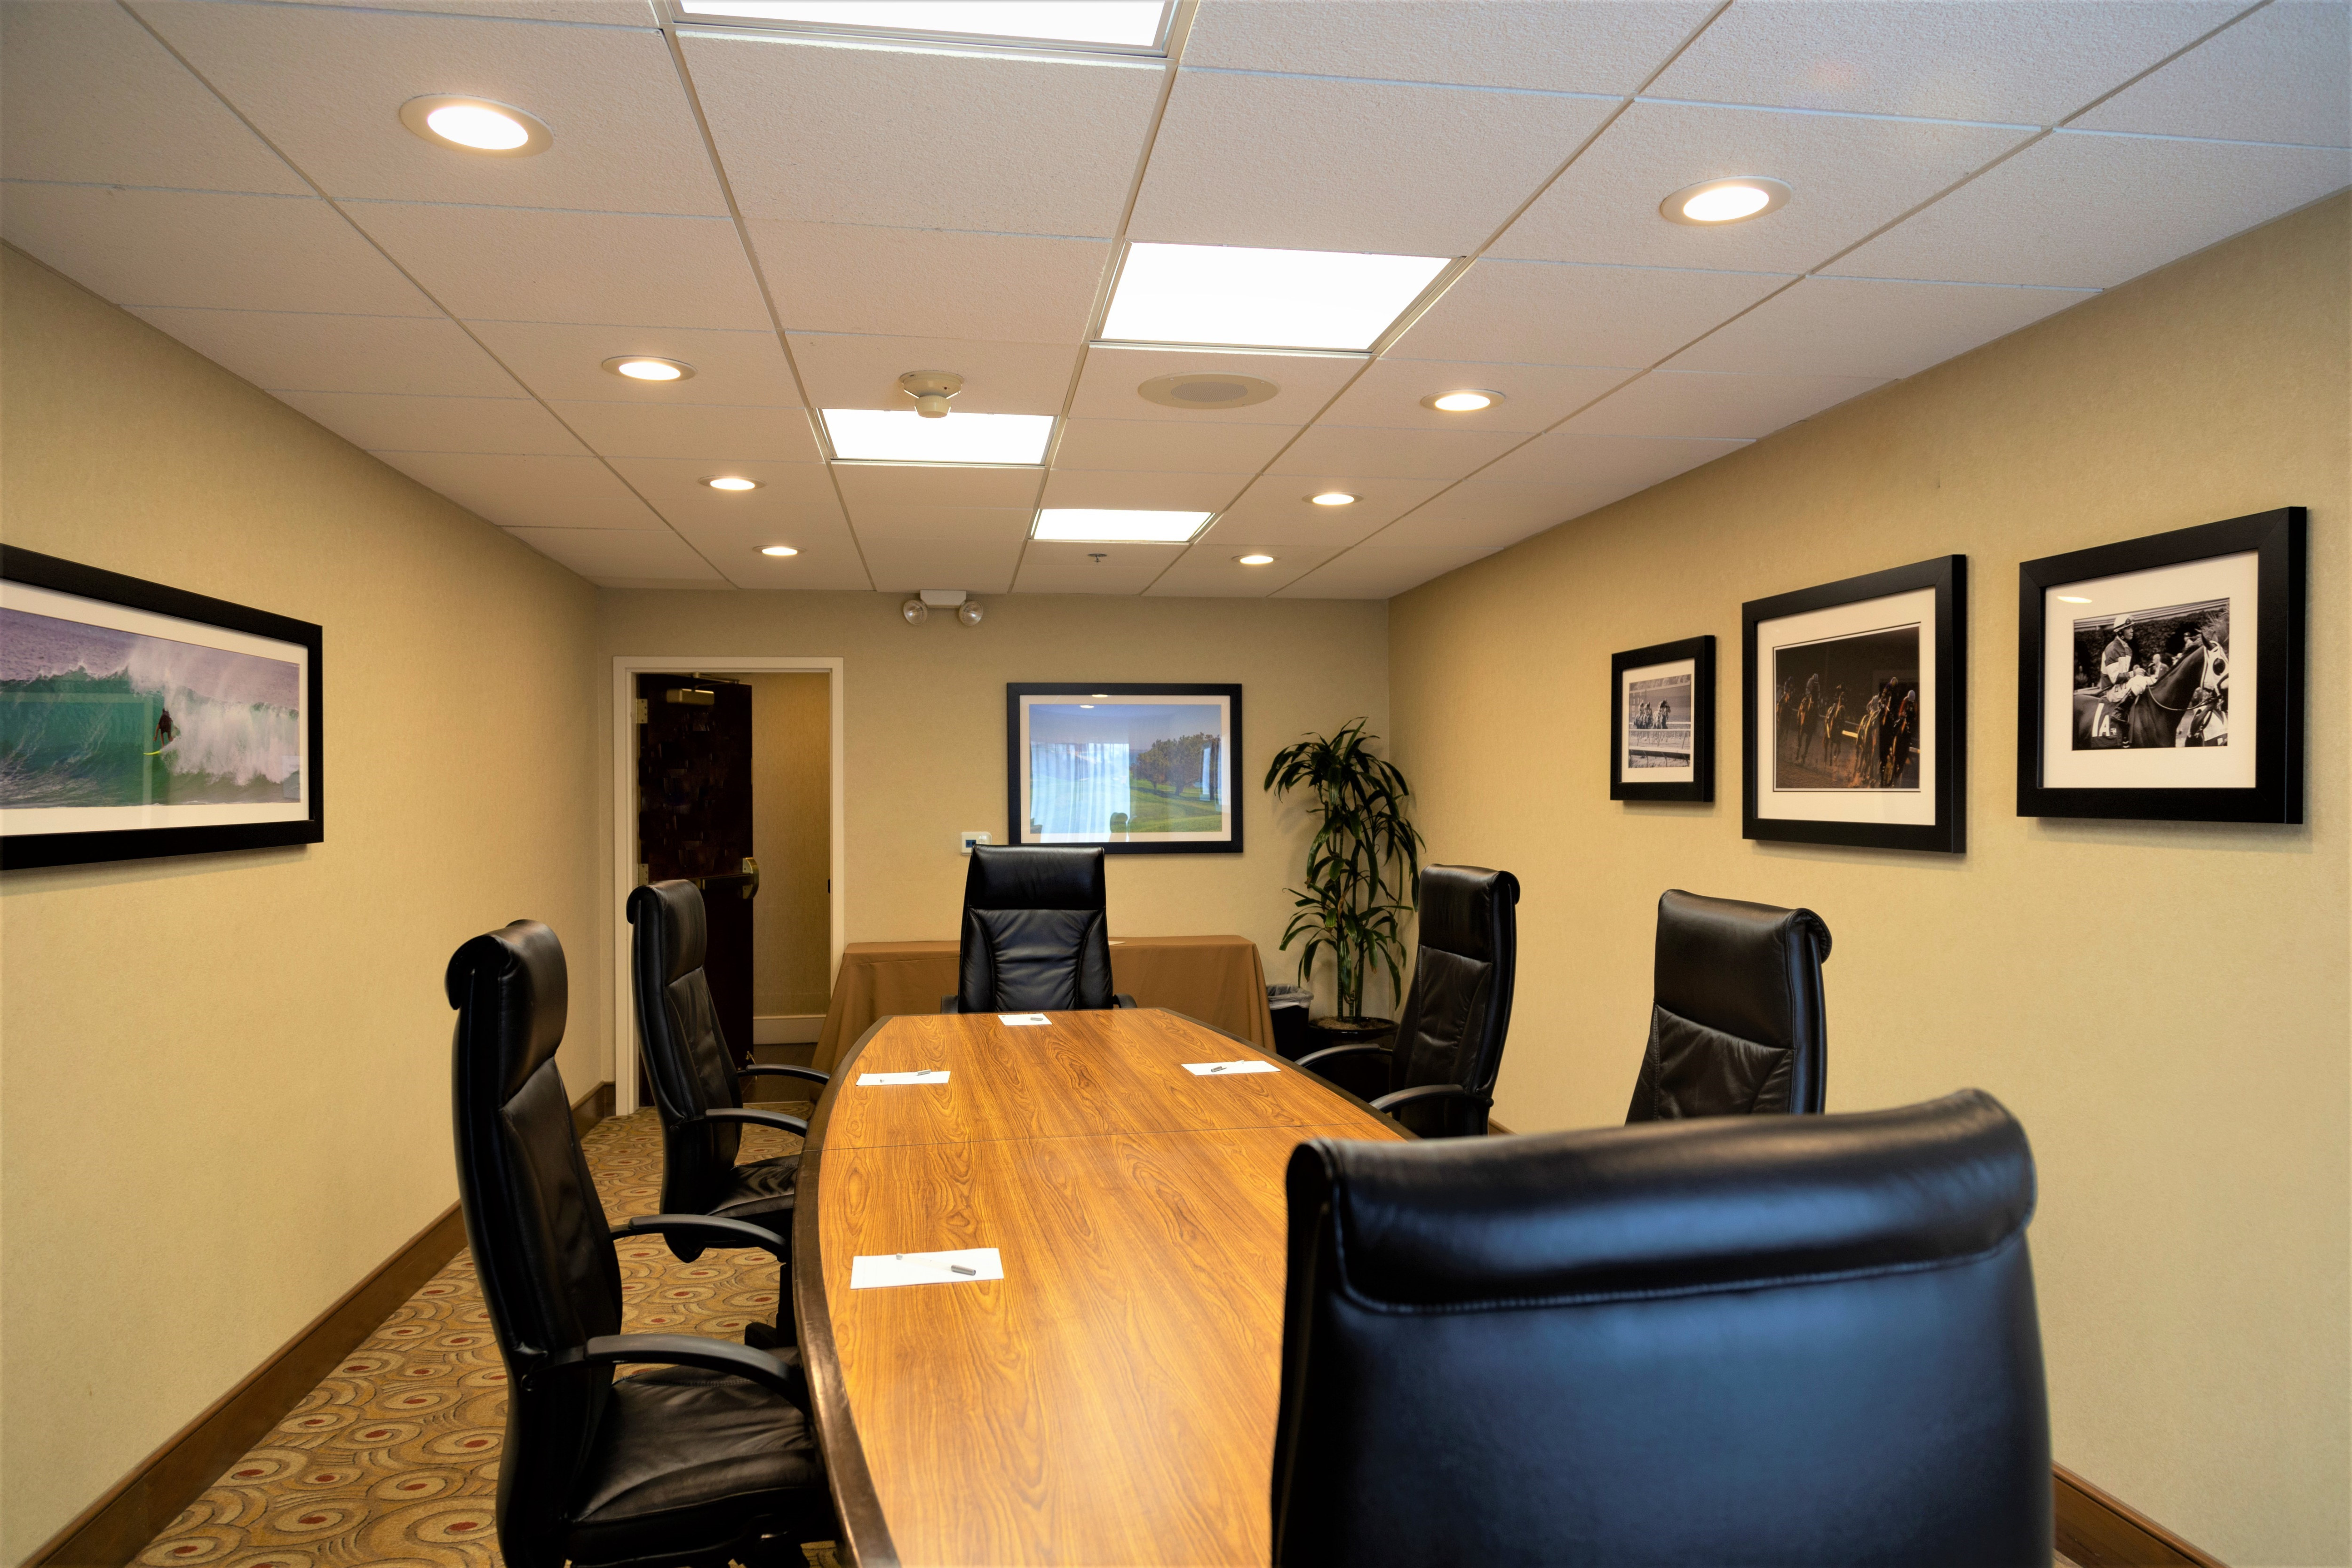 Meeting Space, Boardroom, Table Chairs and Wall Art